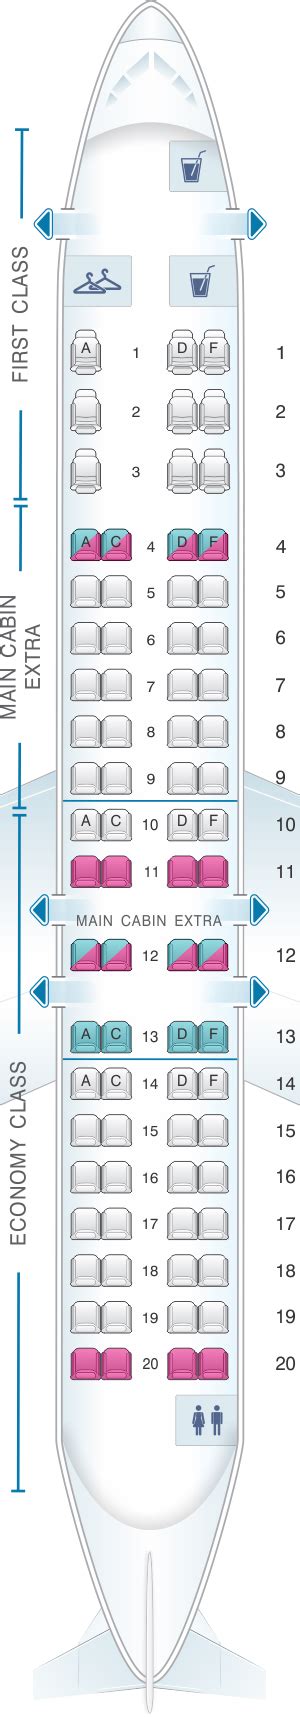 Seat Map American Airlines Crj V Seatmaestro